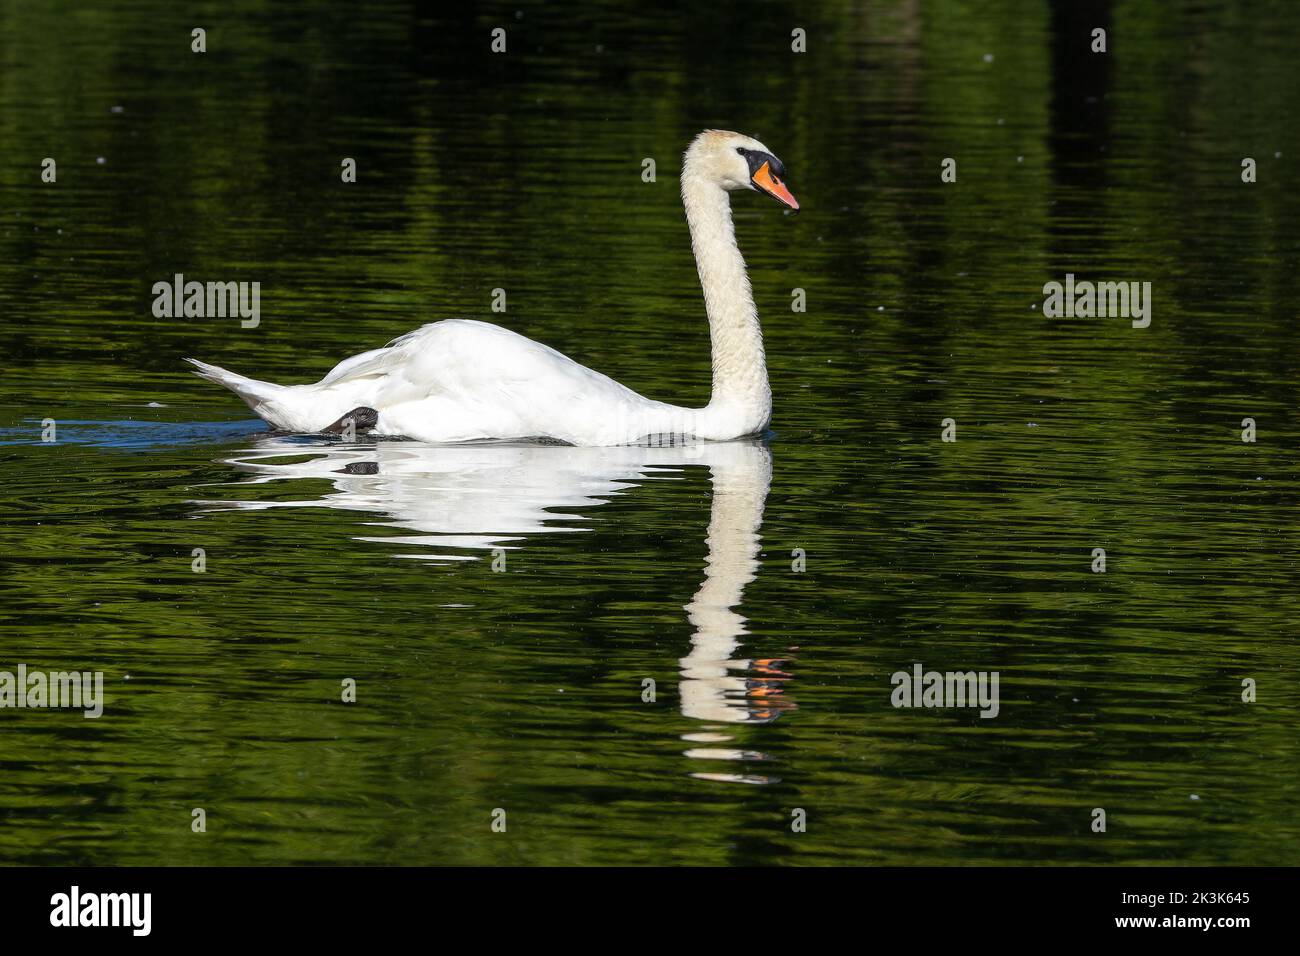 The Mute swan, Cygnus olor is a species of swan and a member of the waterfowl family Anatidae. Here swimming on a lake in Munich, Germany Stock Photo